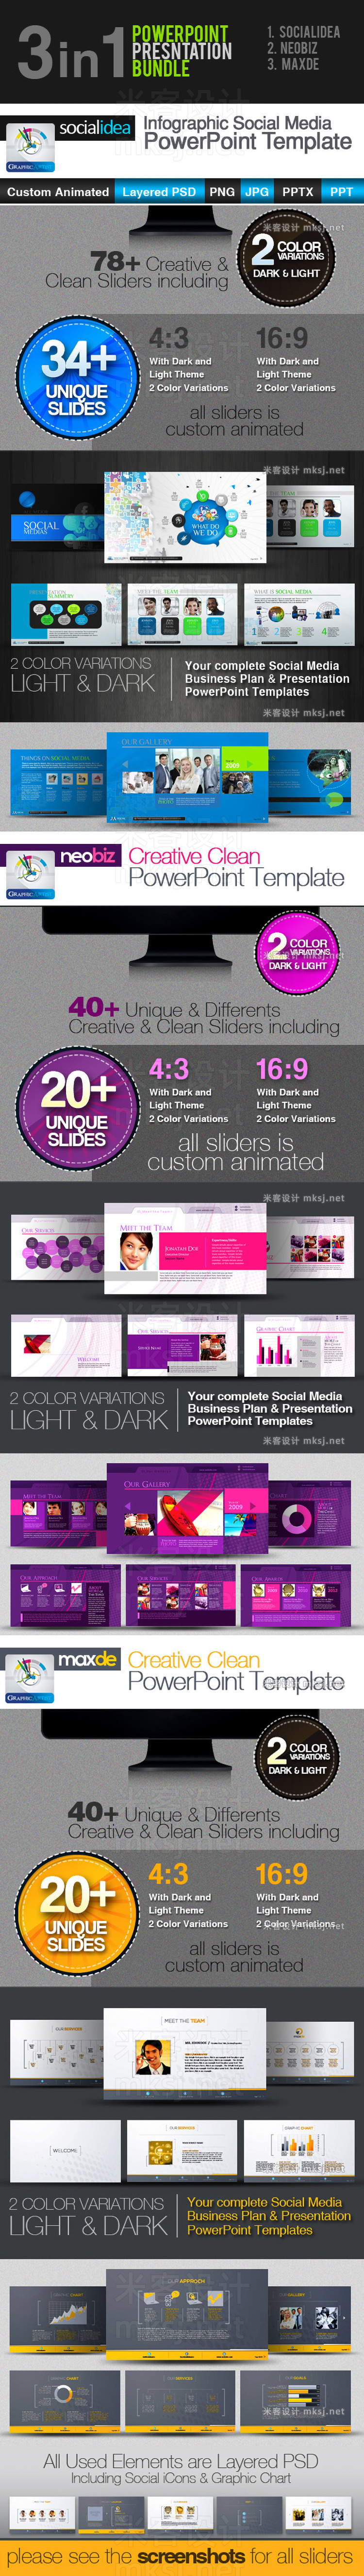 PPT模板 in1 powerpoint templates bundle